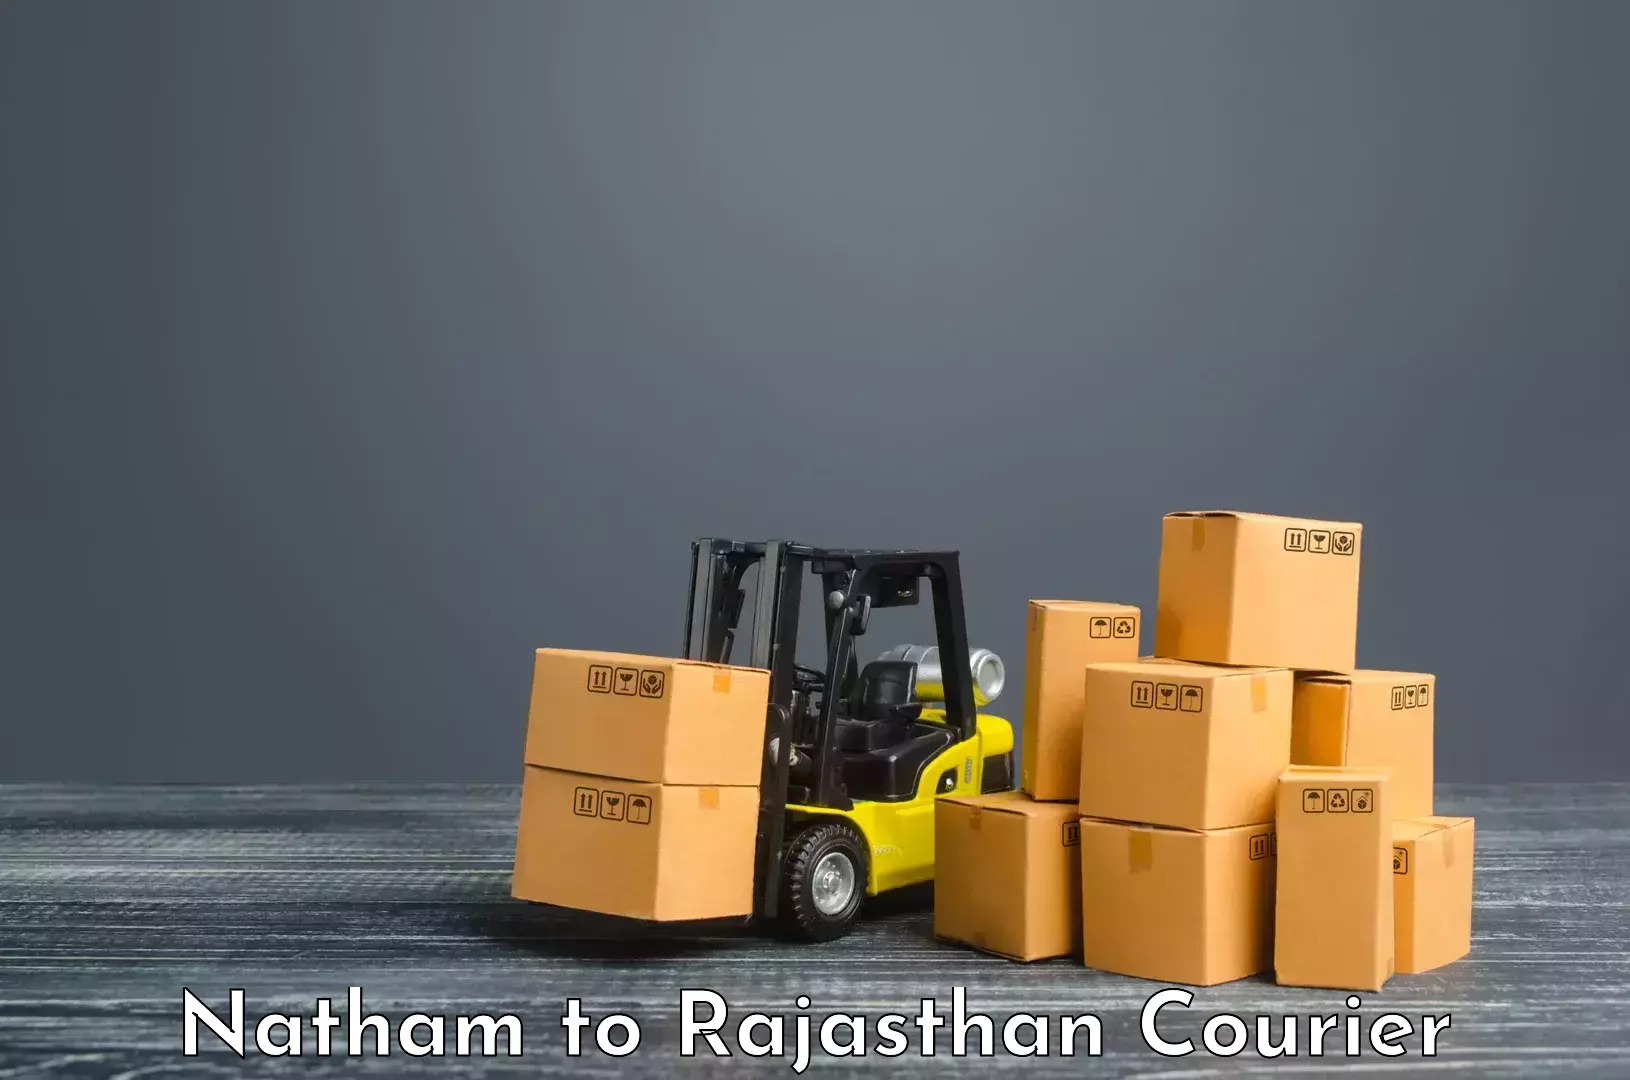 Overnight delivery services Natham to Rajasthan